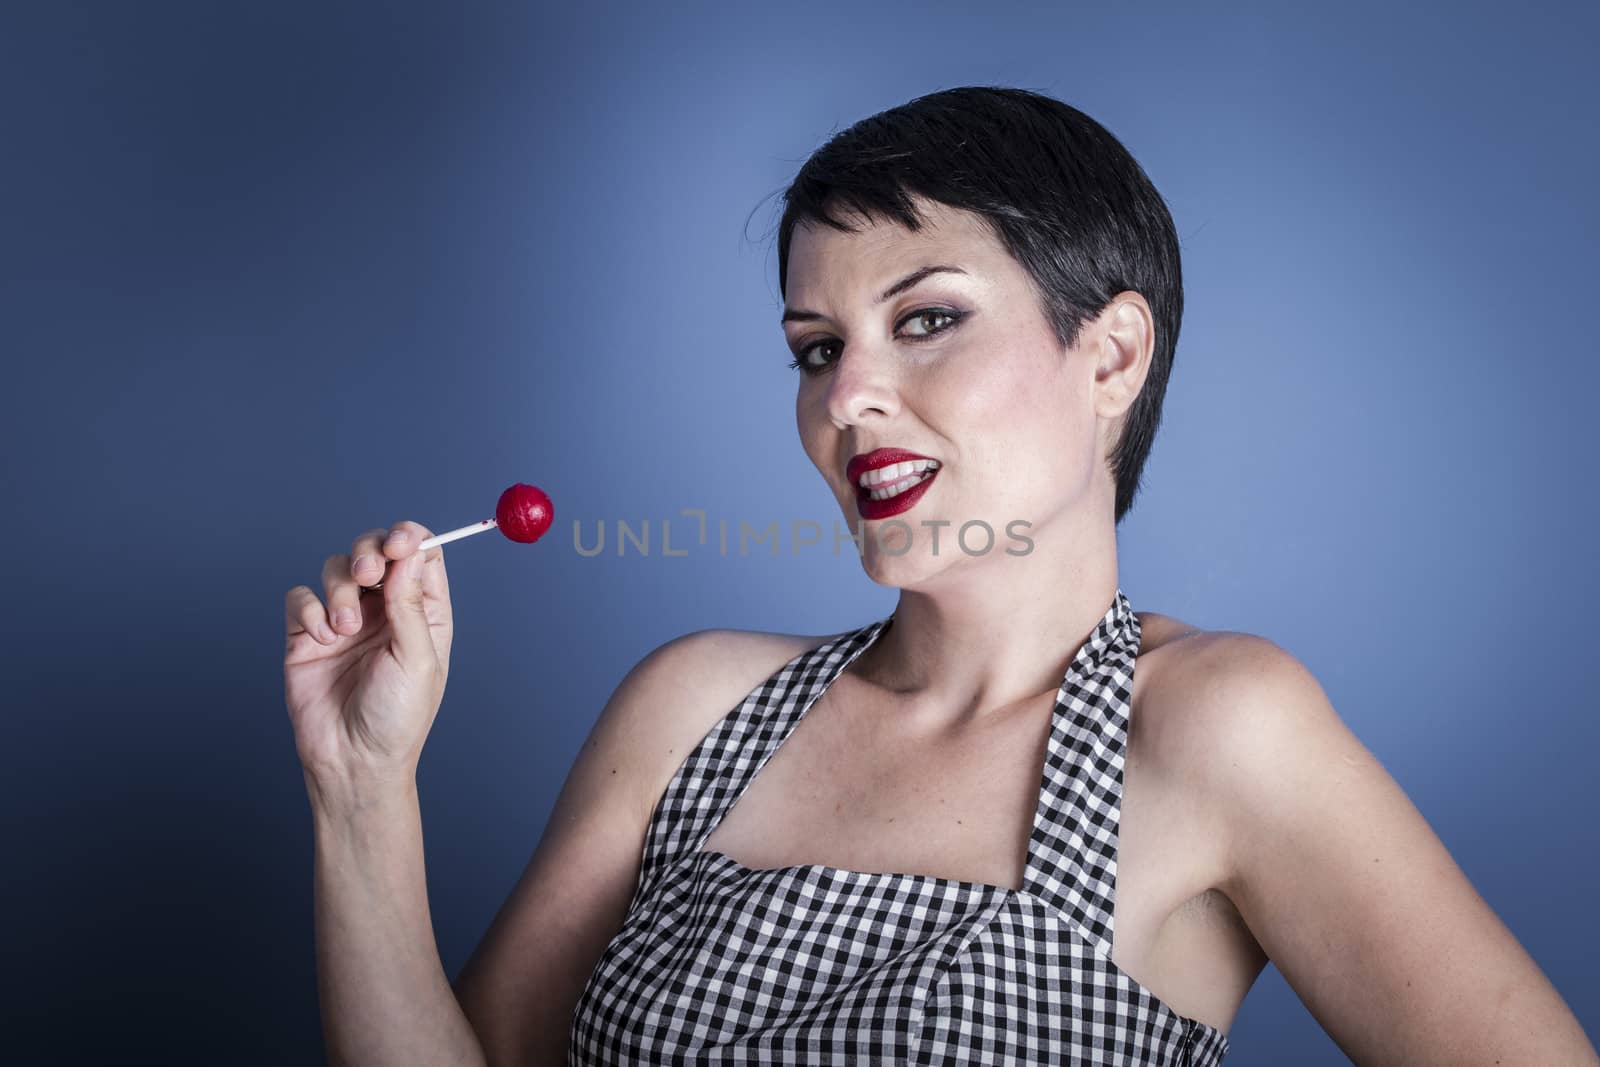 Candy, happy young woman with lollypop in her mouth on blue bac by FernandoCortes